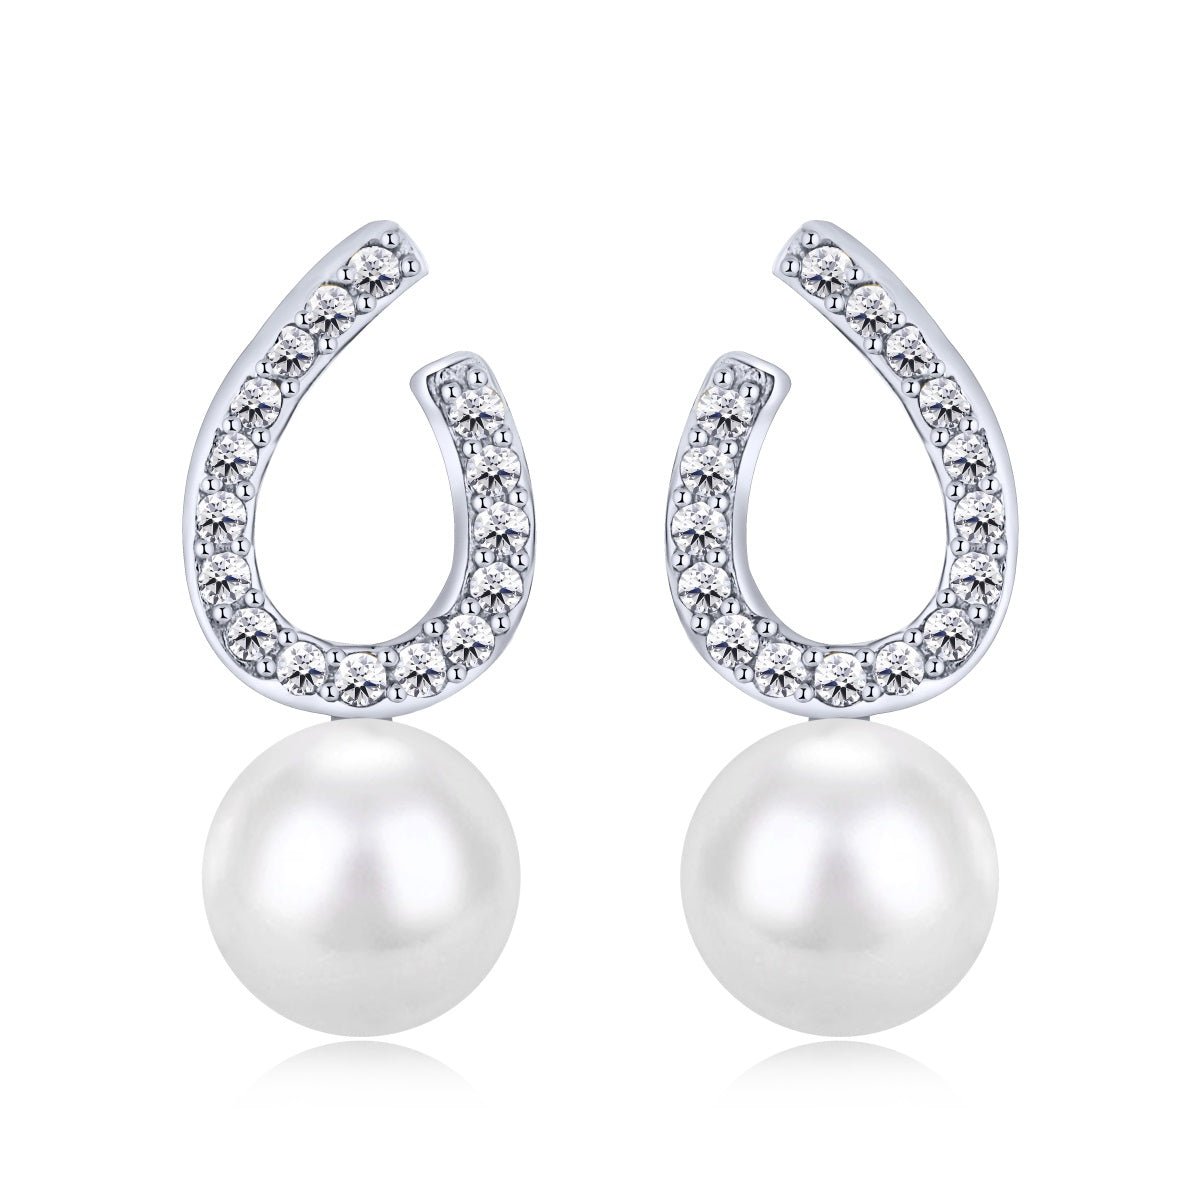 J-Hoops 925 Silver Earrings With Pearl - Jewelry - EM Accessories - 925 silver - new - SILVER-0019-ER